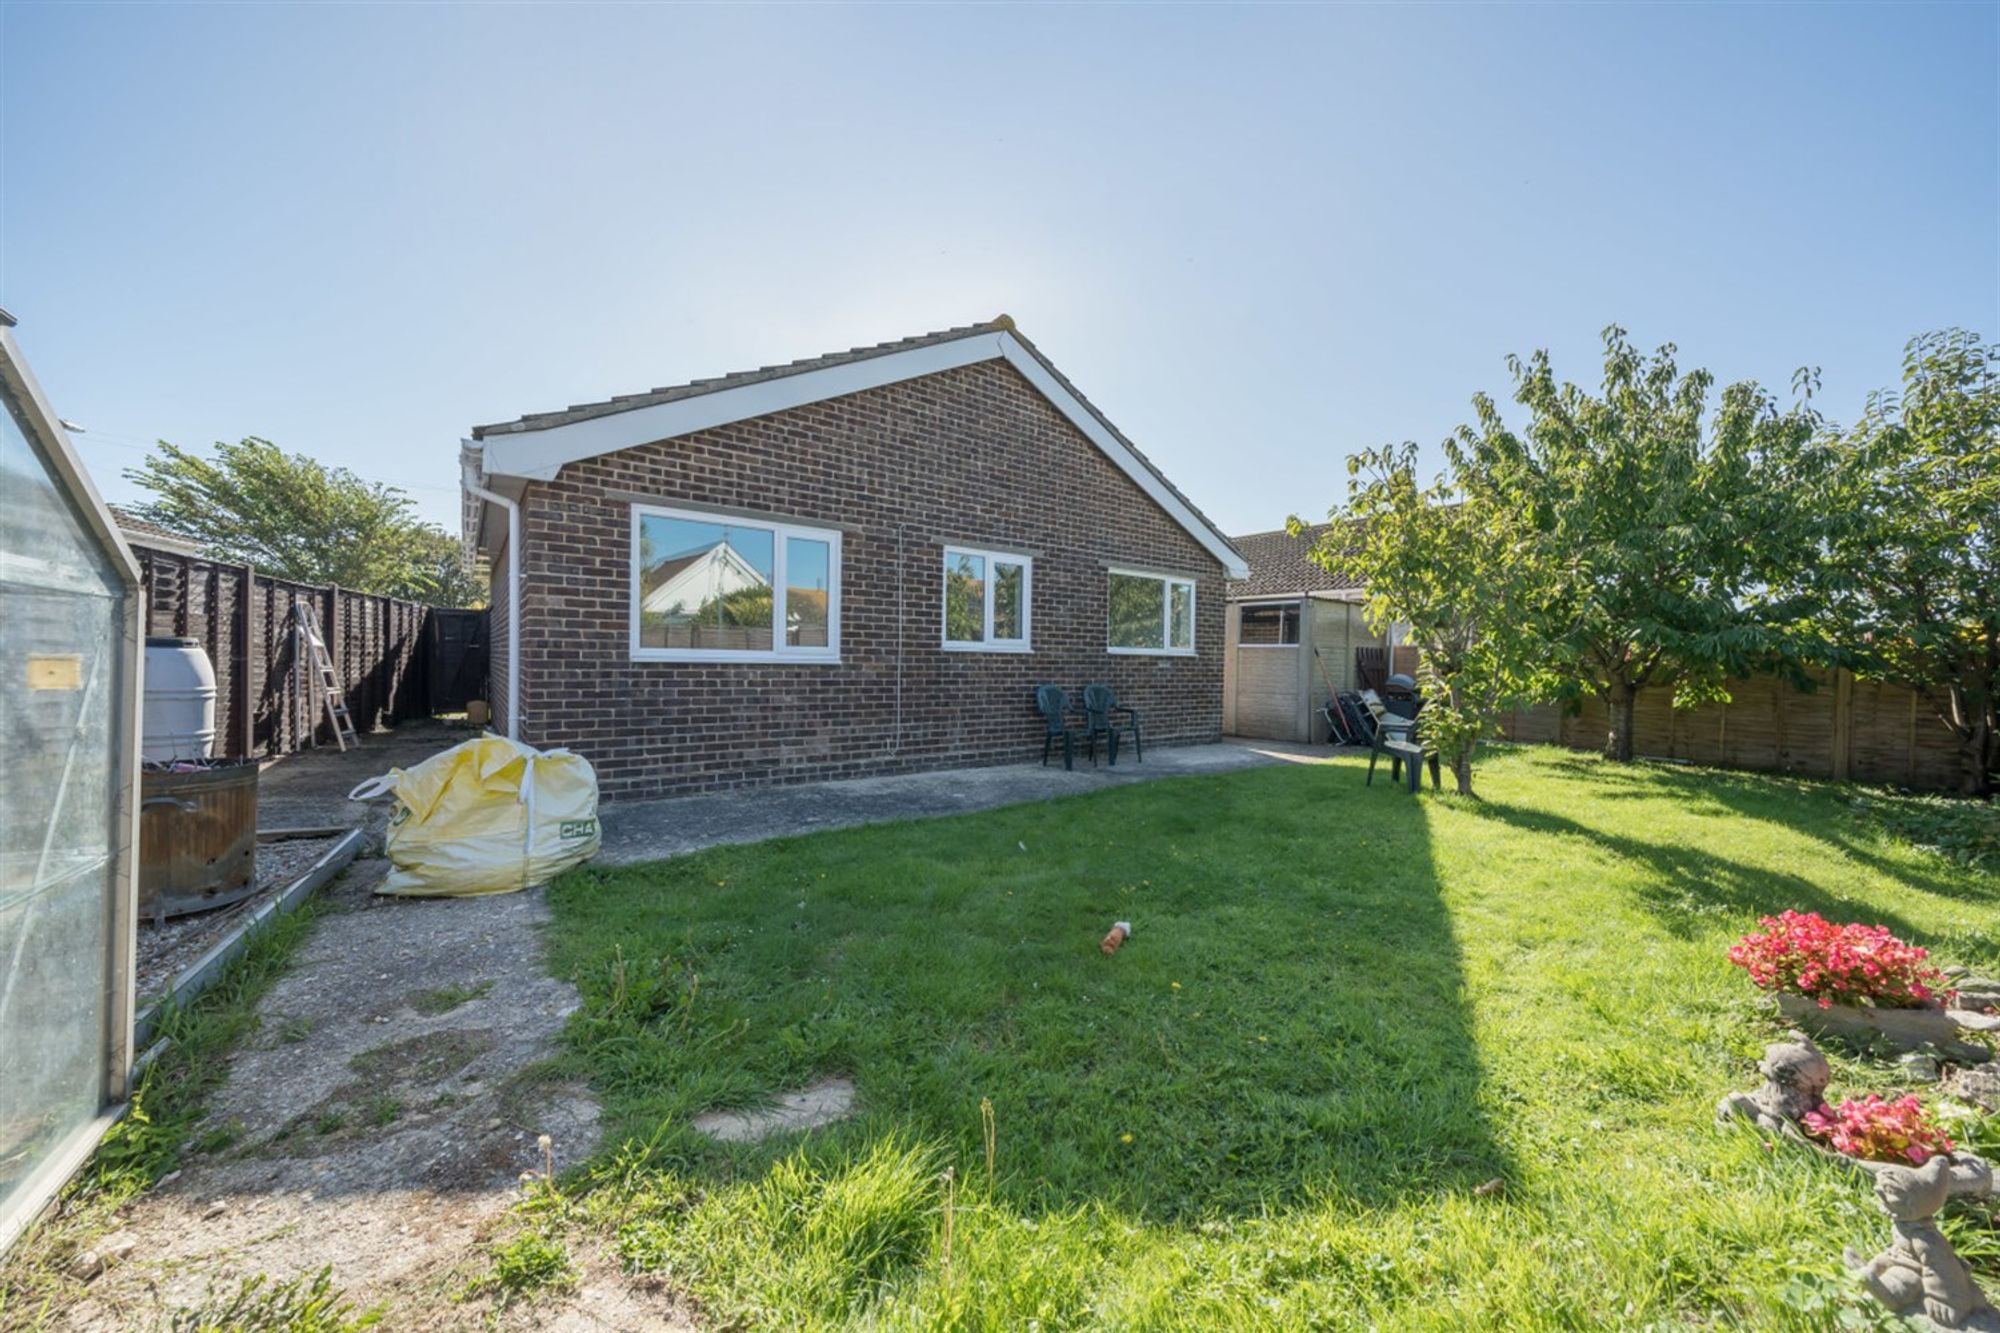 Harcourt Way, Selsey, PO20